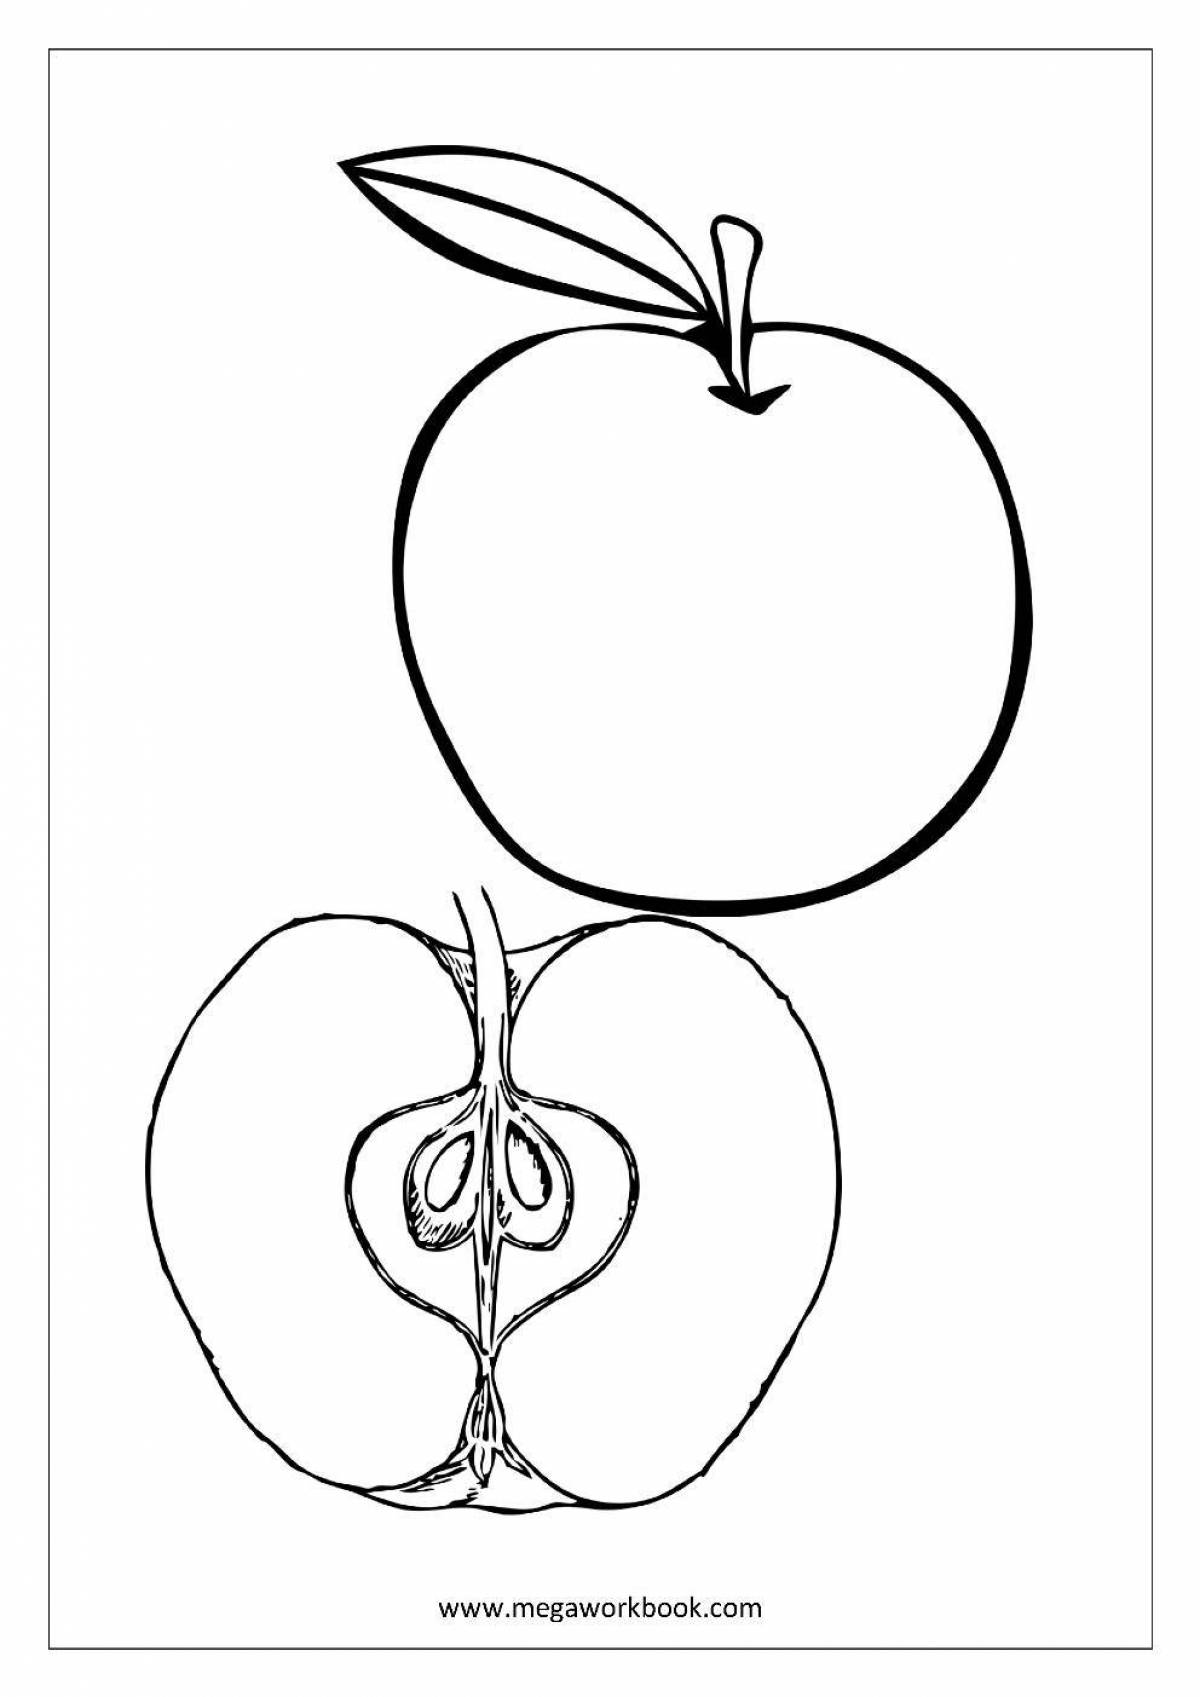 Coloring book sunny apple